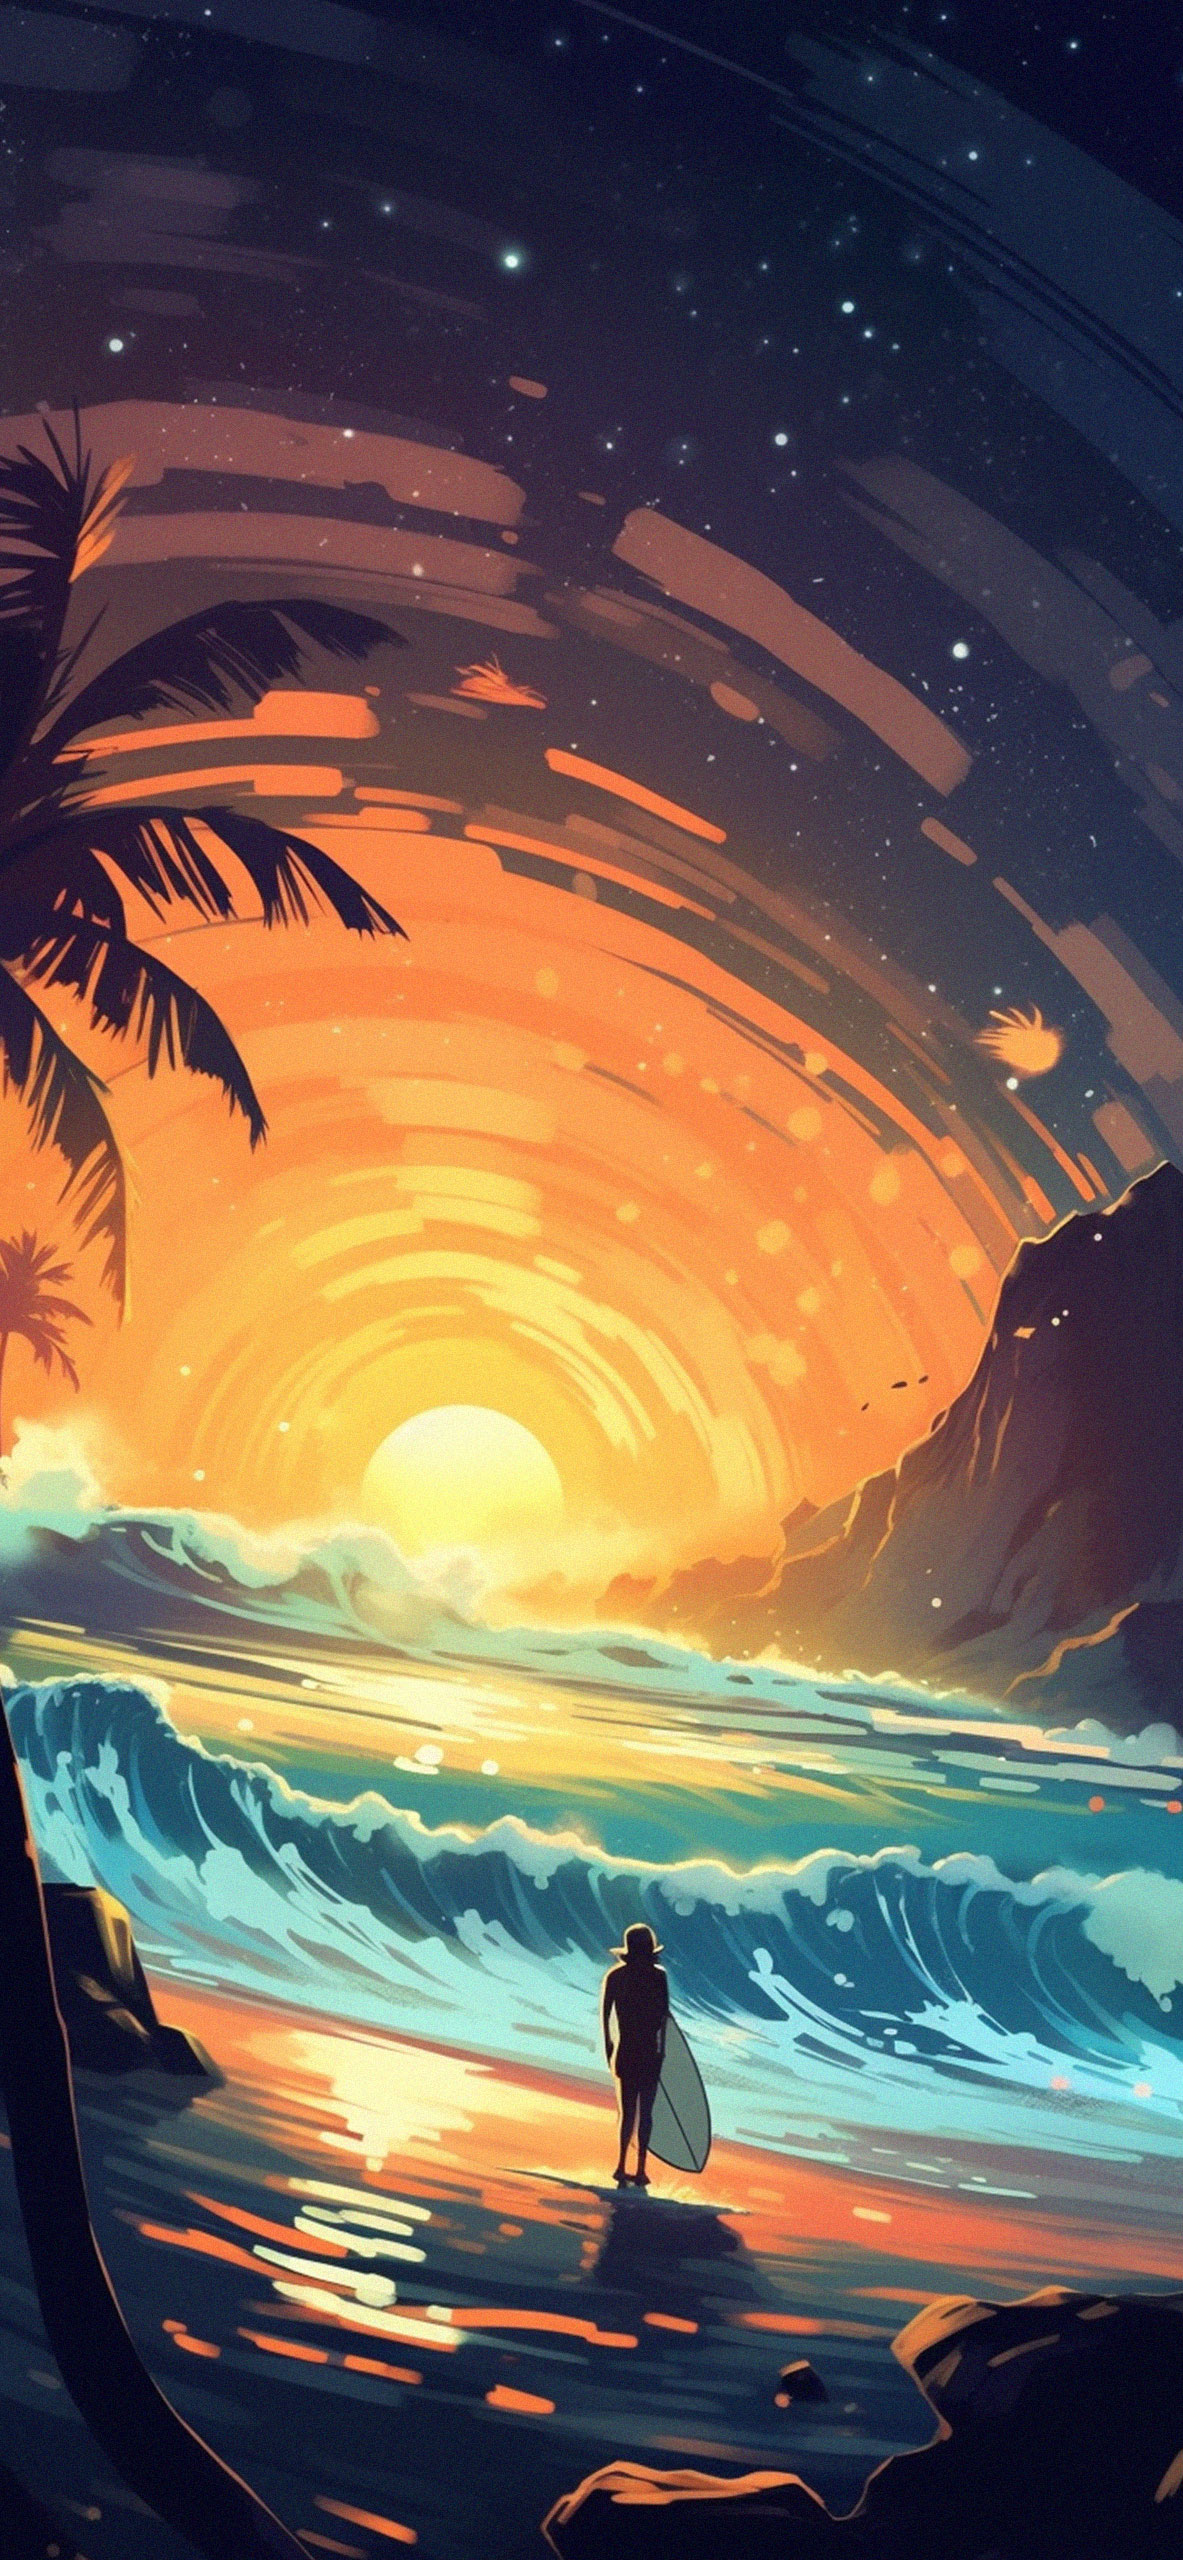 Sunset and Surfer Aesthetic Wallpapers  Aesthetic Nature Wallpaper